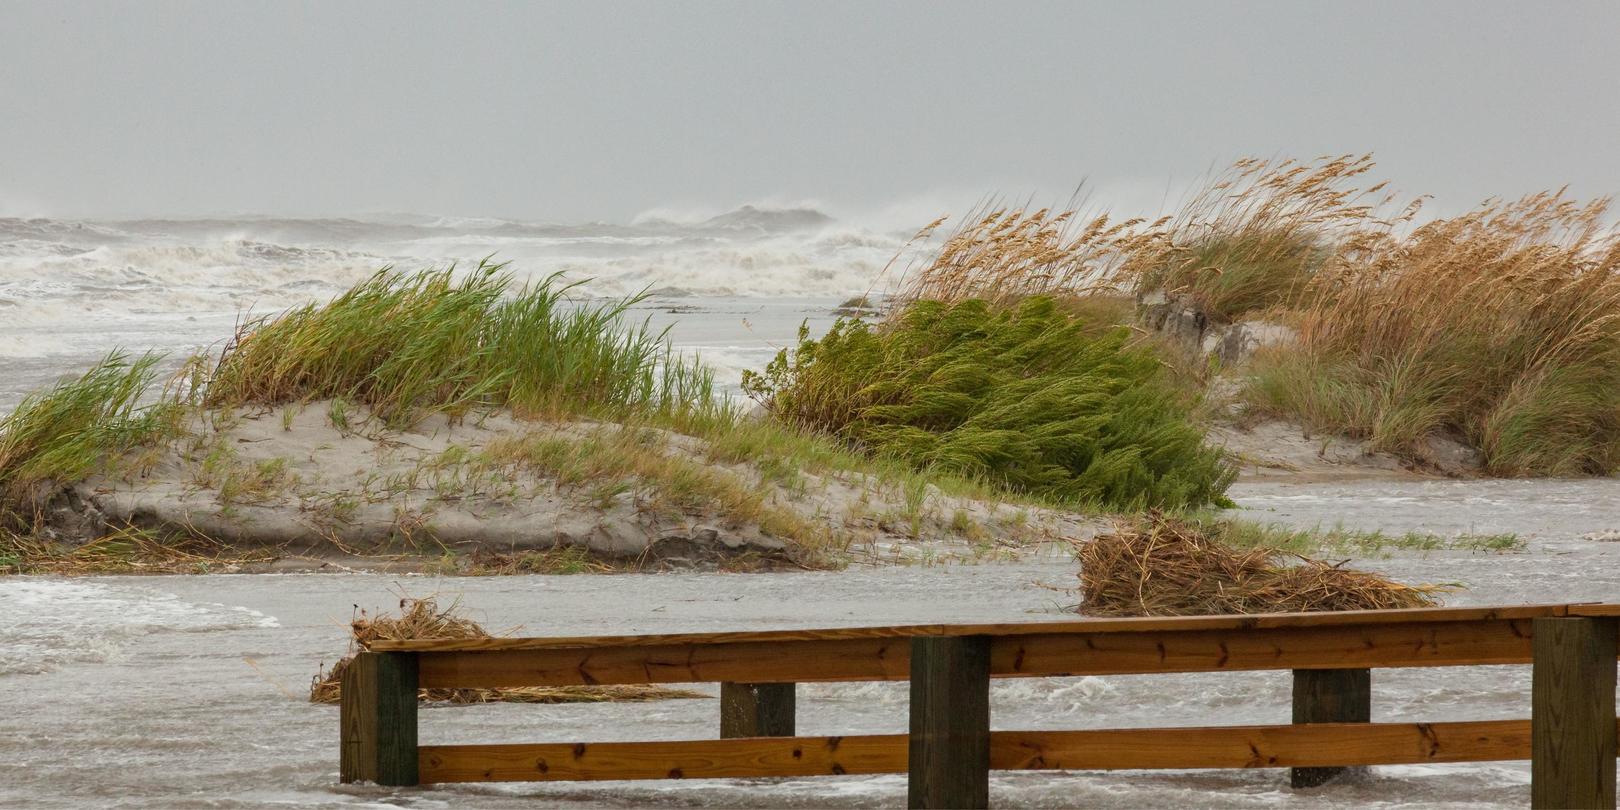 A strong gale blowing vegetation on sand dunes and creating strong waves on the shoreline